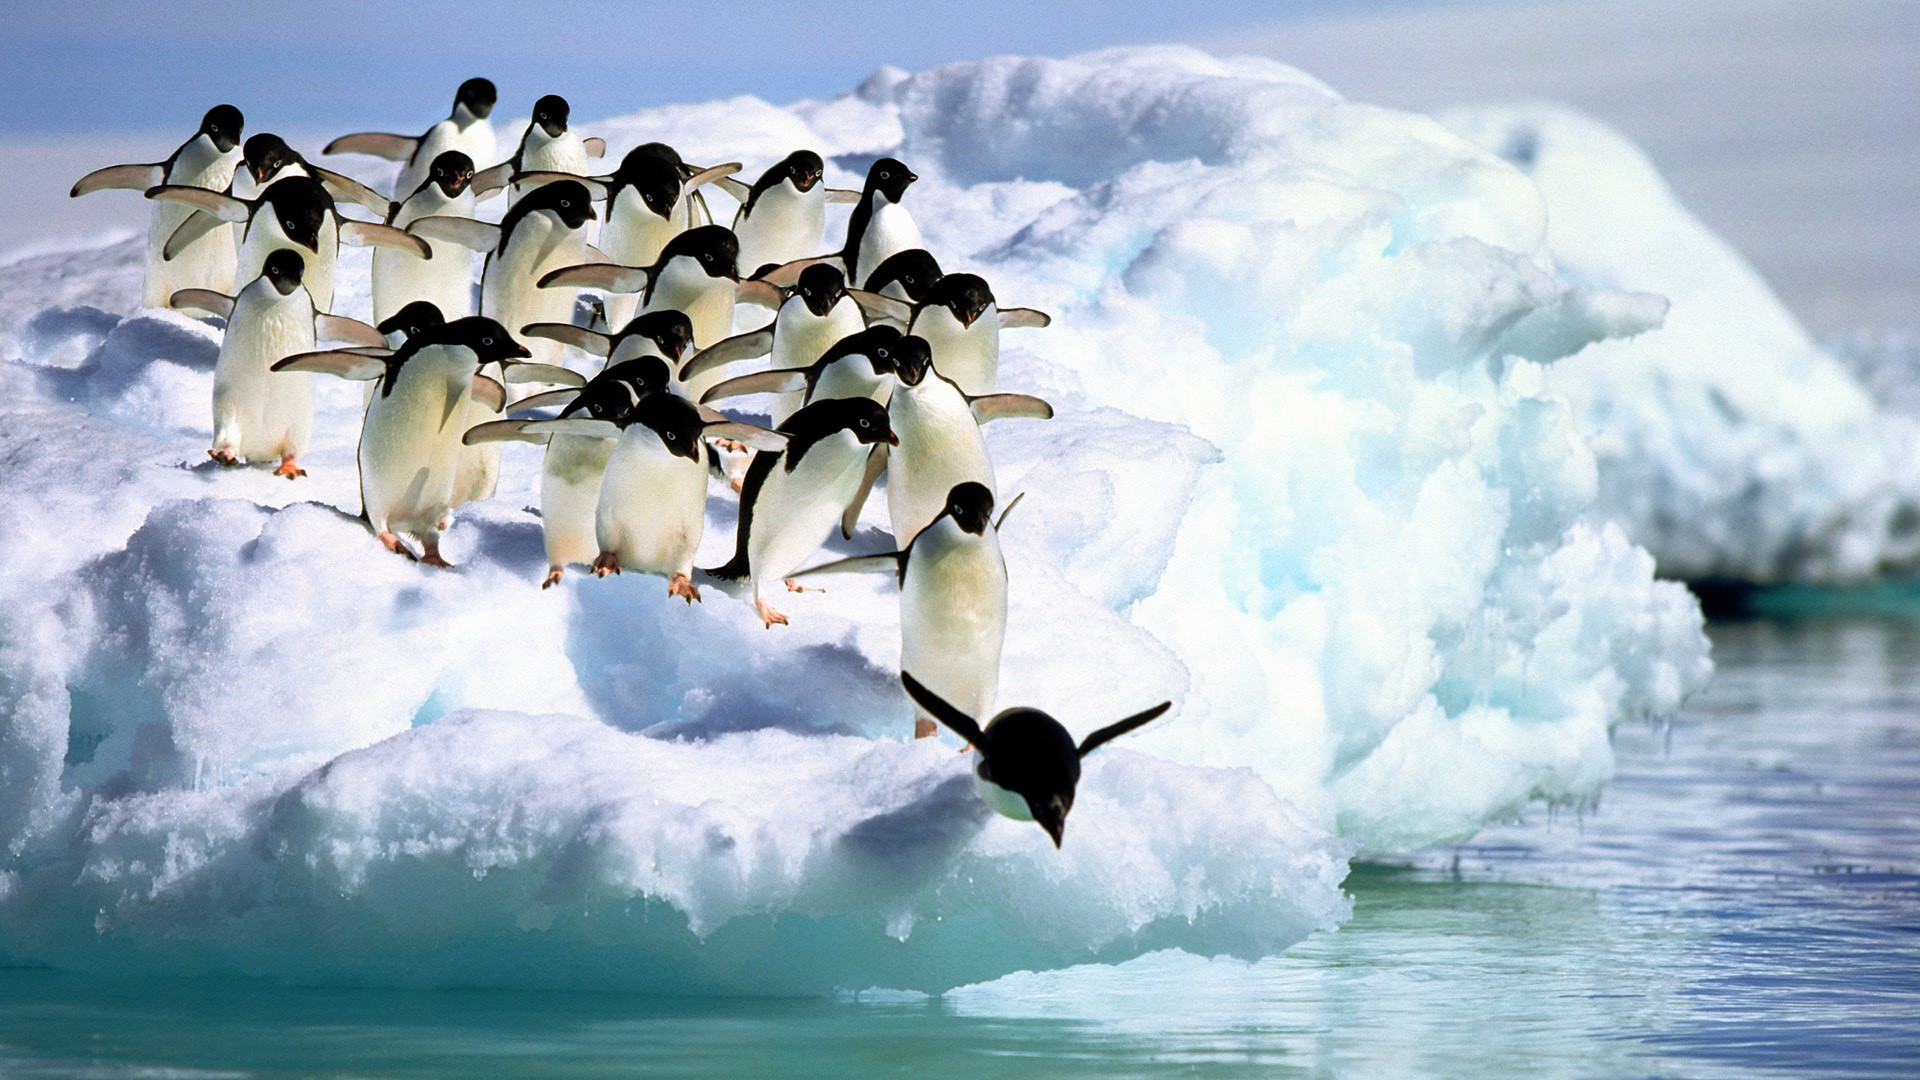 1920x1080 HD Penguins Wallpapers and Photos | HD Animals Wallpapers